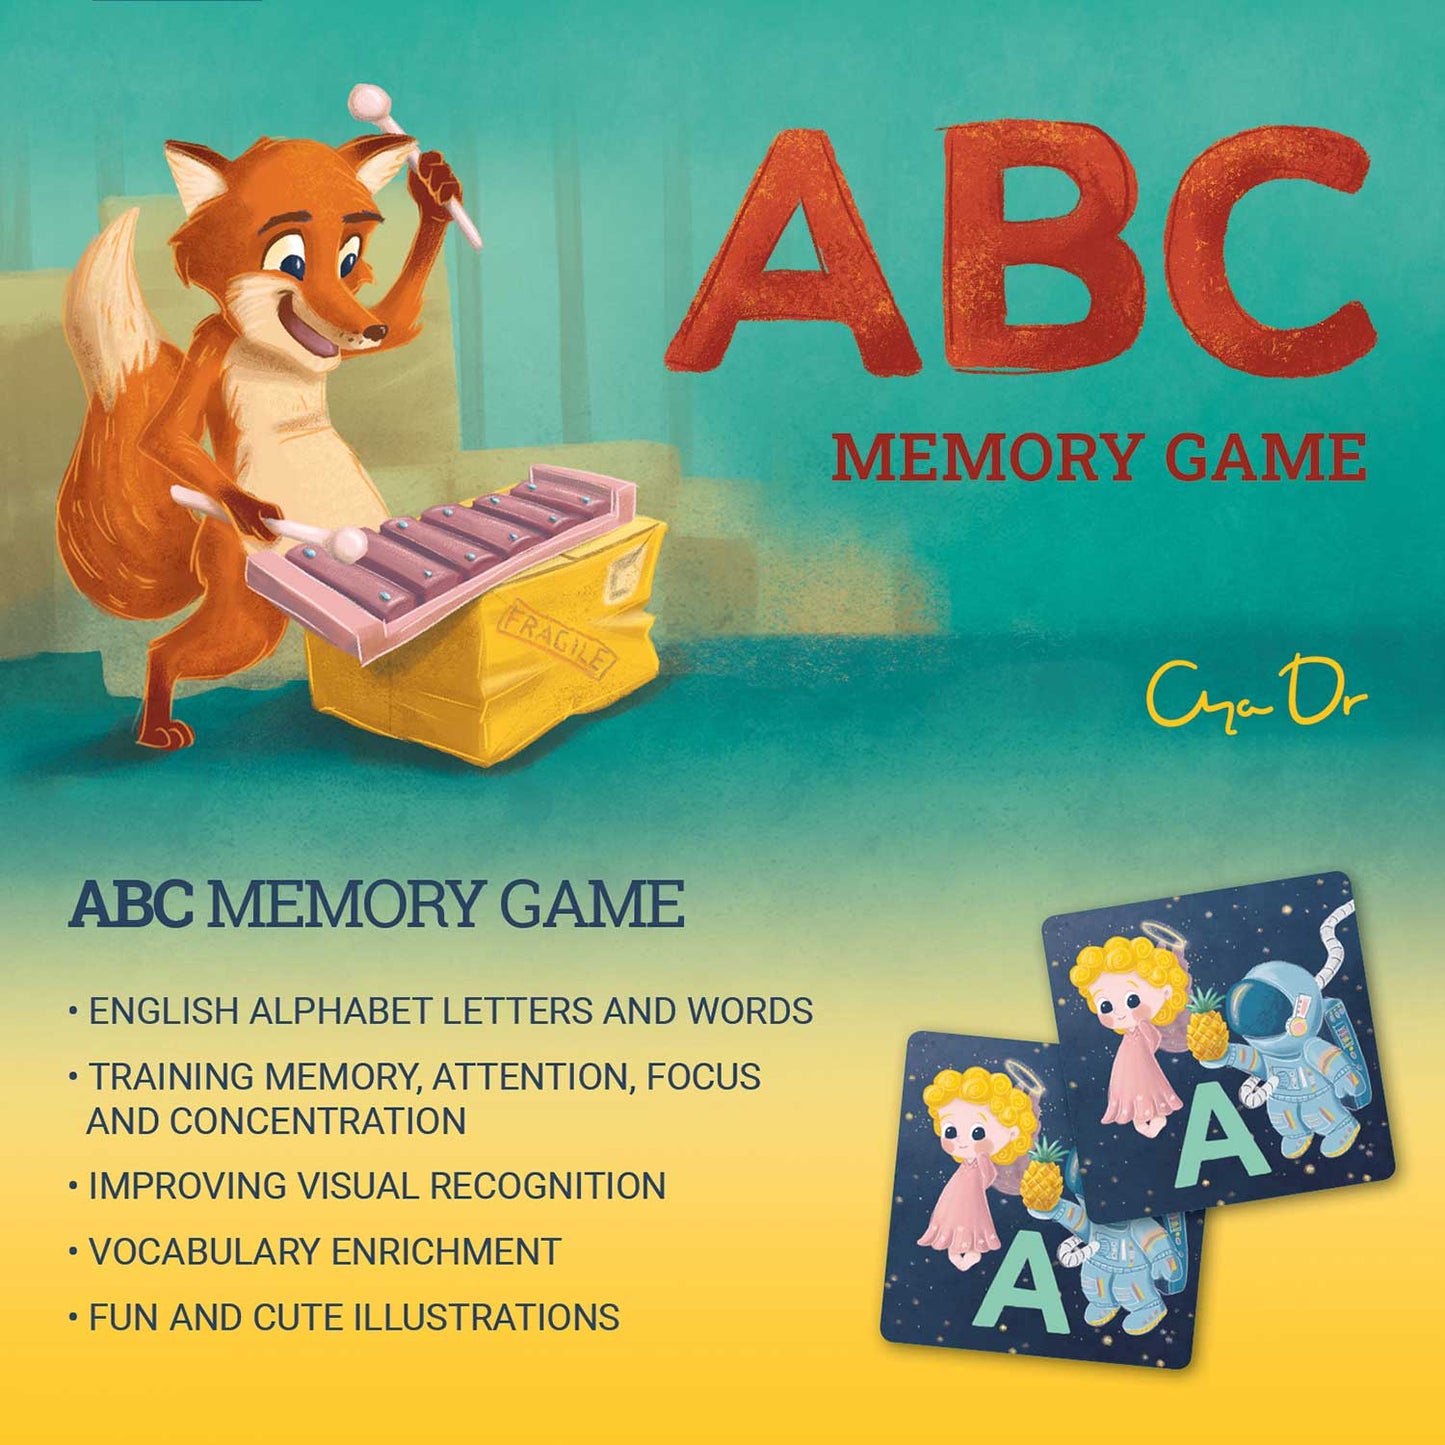 ABC memory game ali igra psomin z angleško abecedo. Training memory, attention, focus and concentration. Improving visual recognition. Vocabulary enrichment. Fun and cute illustrations. 